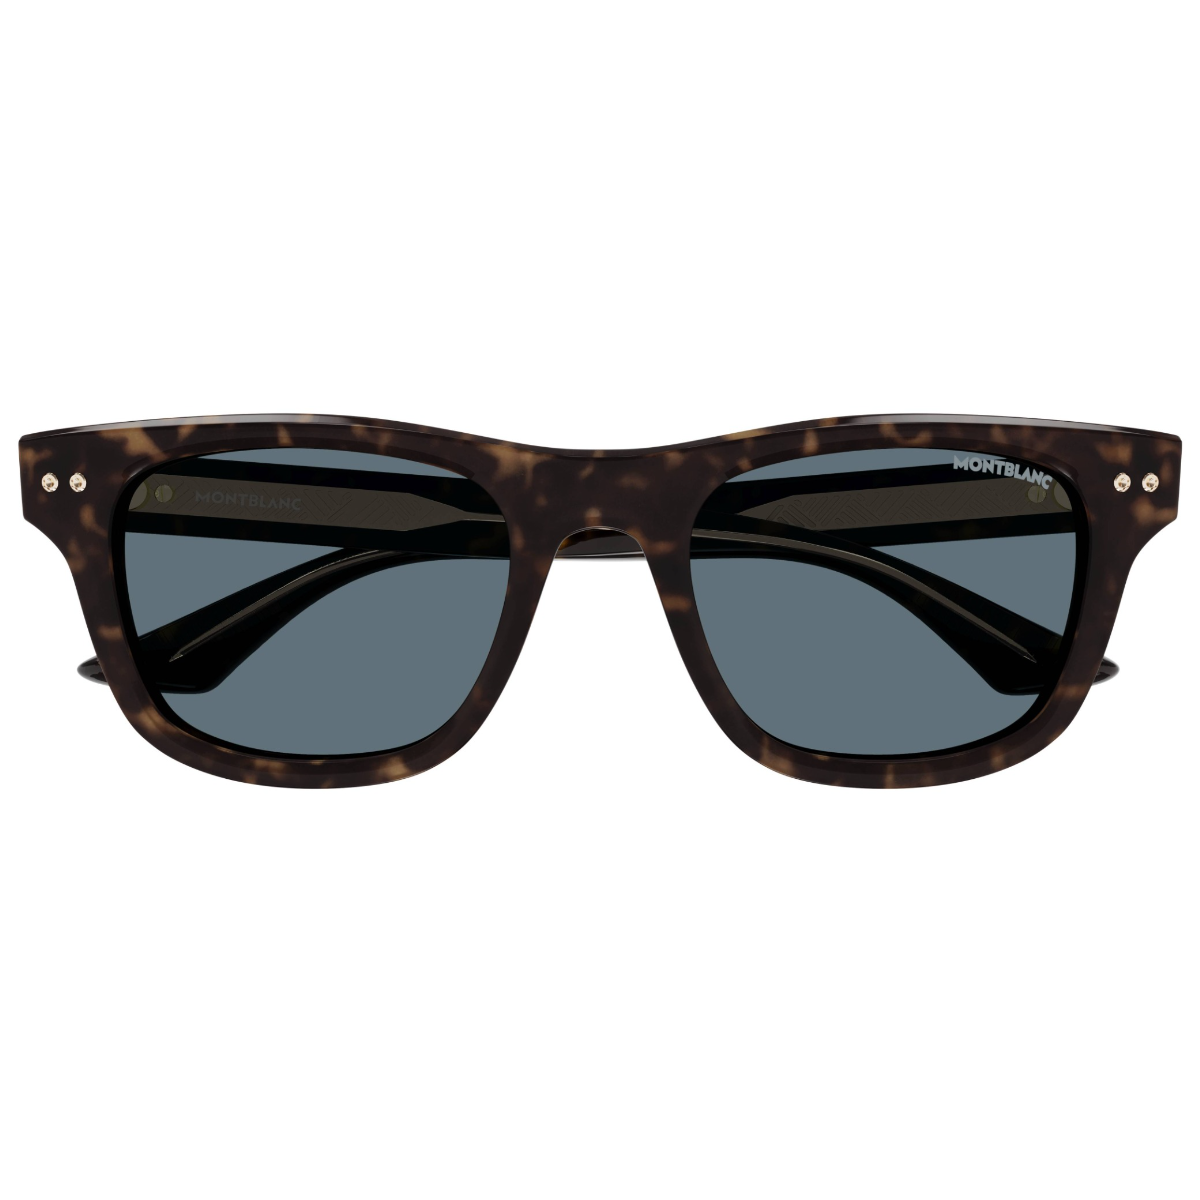 "Stylish Mont Blanc MB0254S Square Sunglasses for Men at Optorium - Elevate your style with the best selection of men's sunglasses. Shop now!"